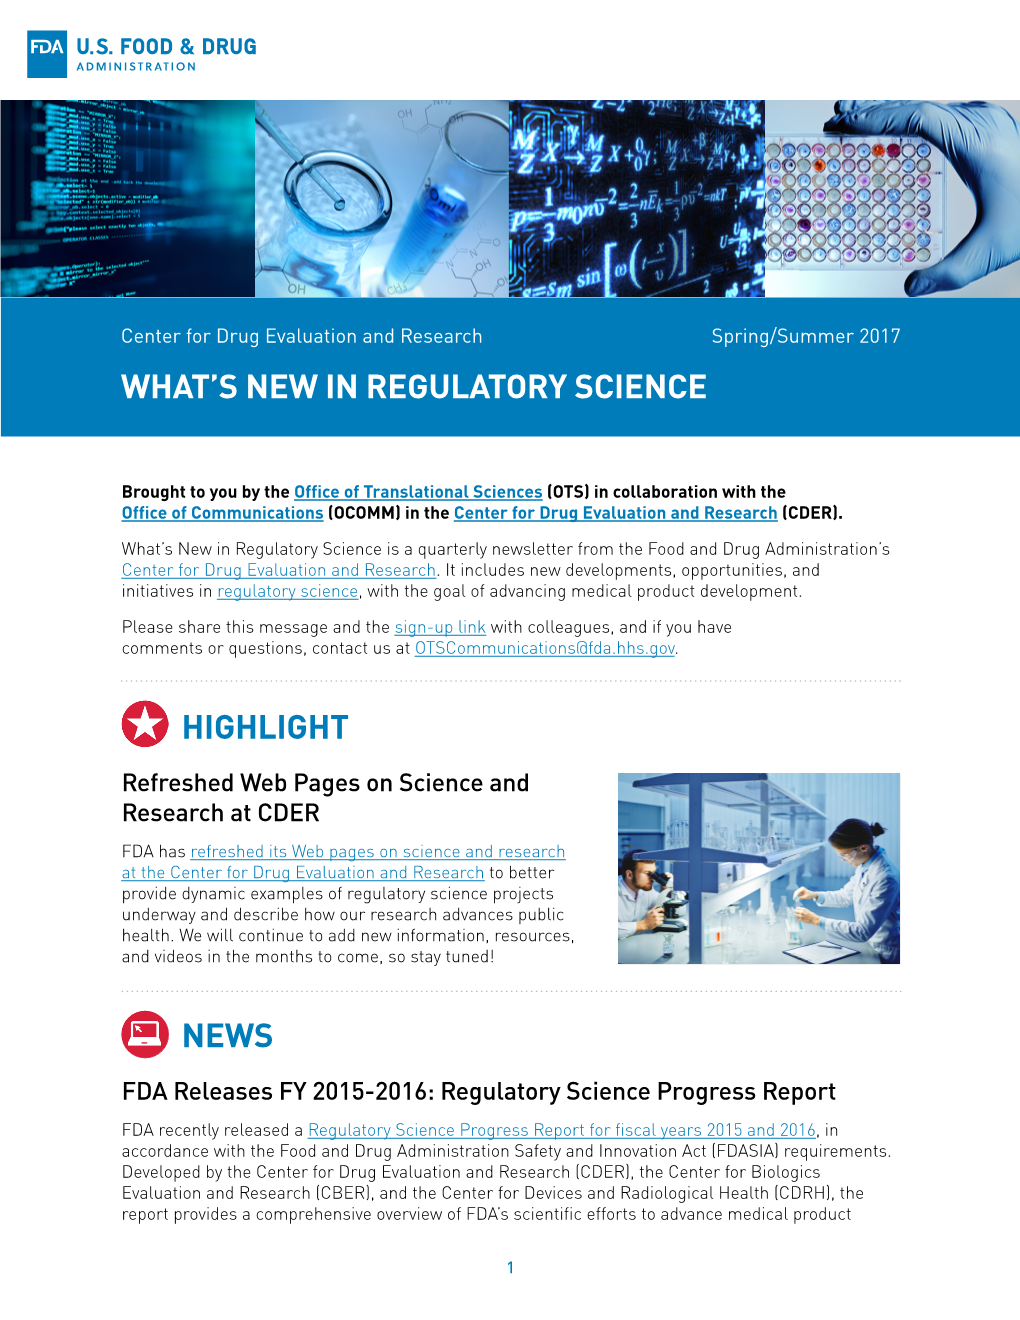 What's New in Regulatory Science